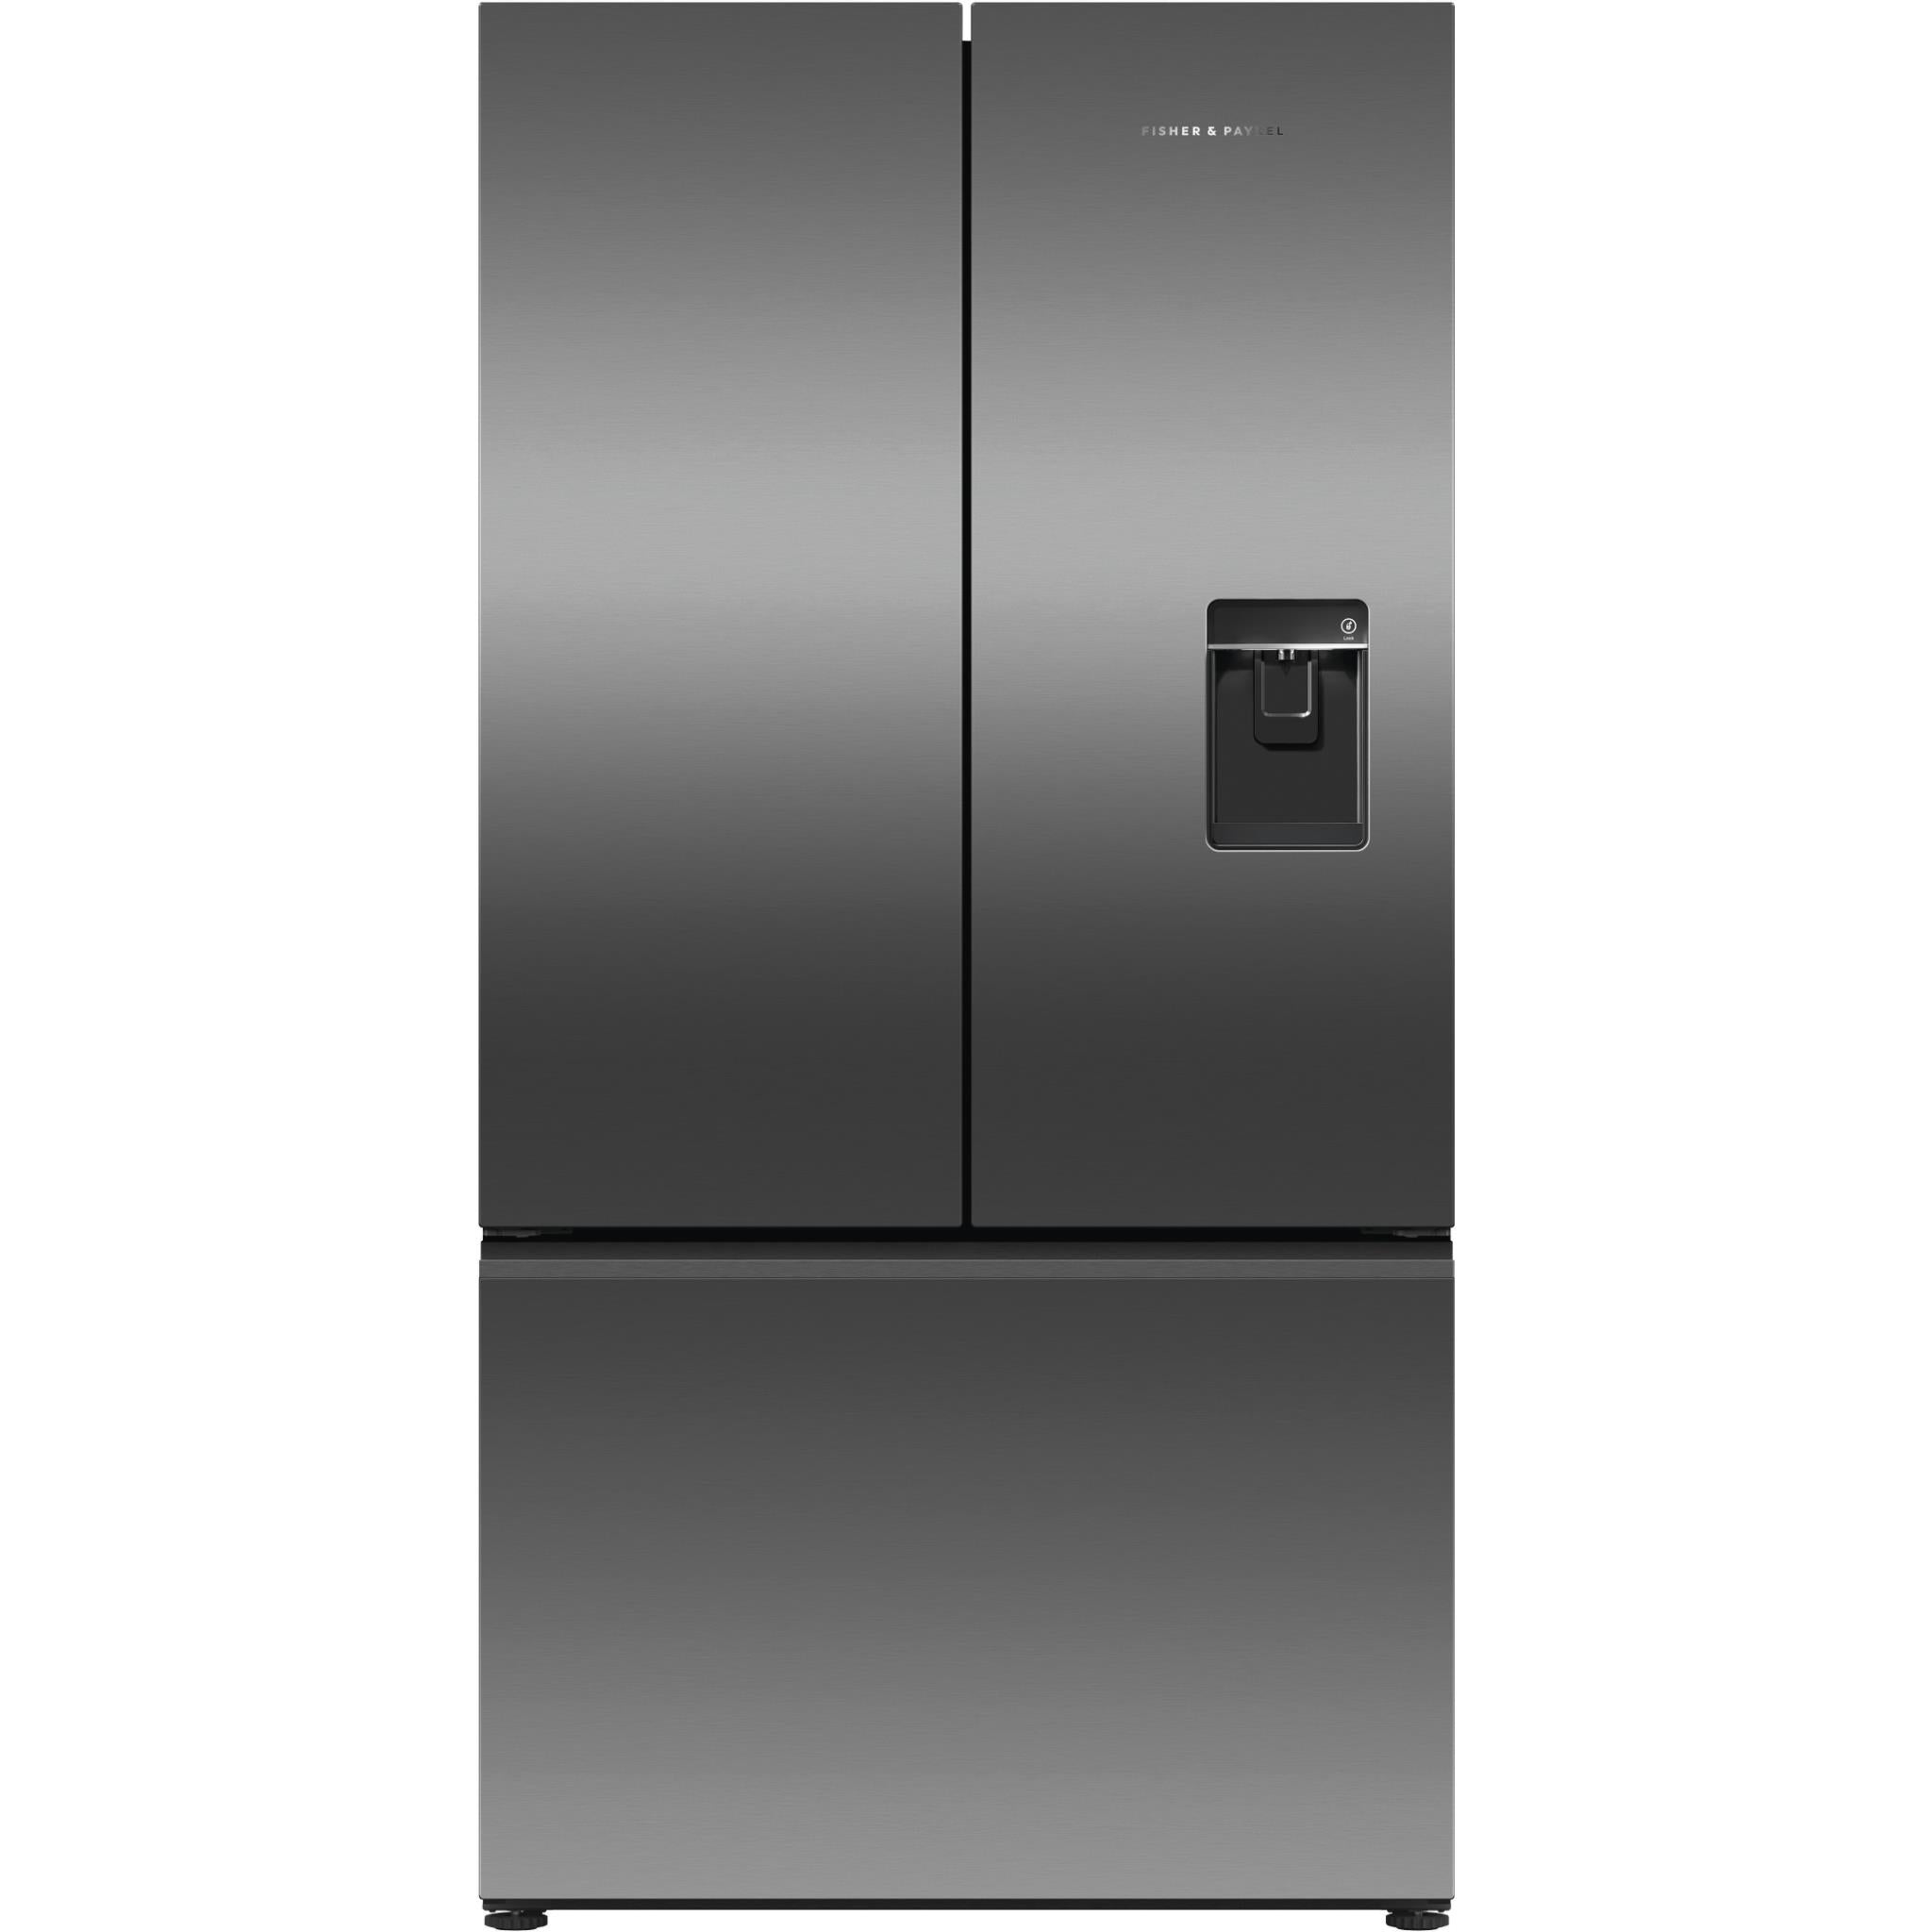 fisher & paykel rf610anub5 569l french door fridge (black stainless steel)